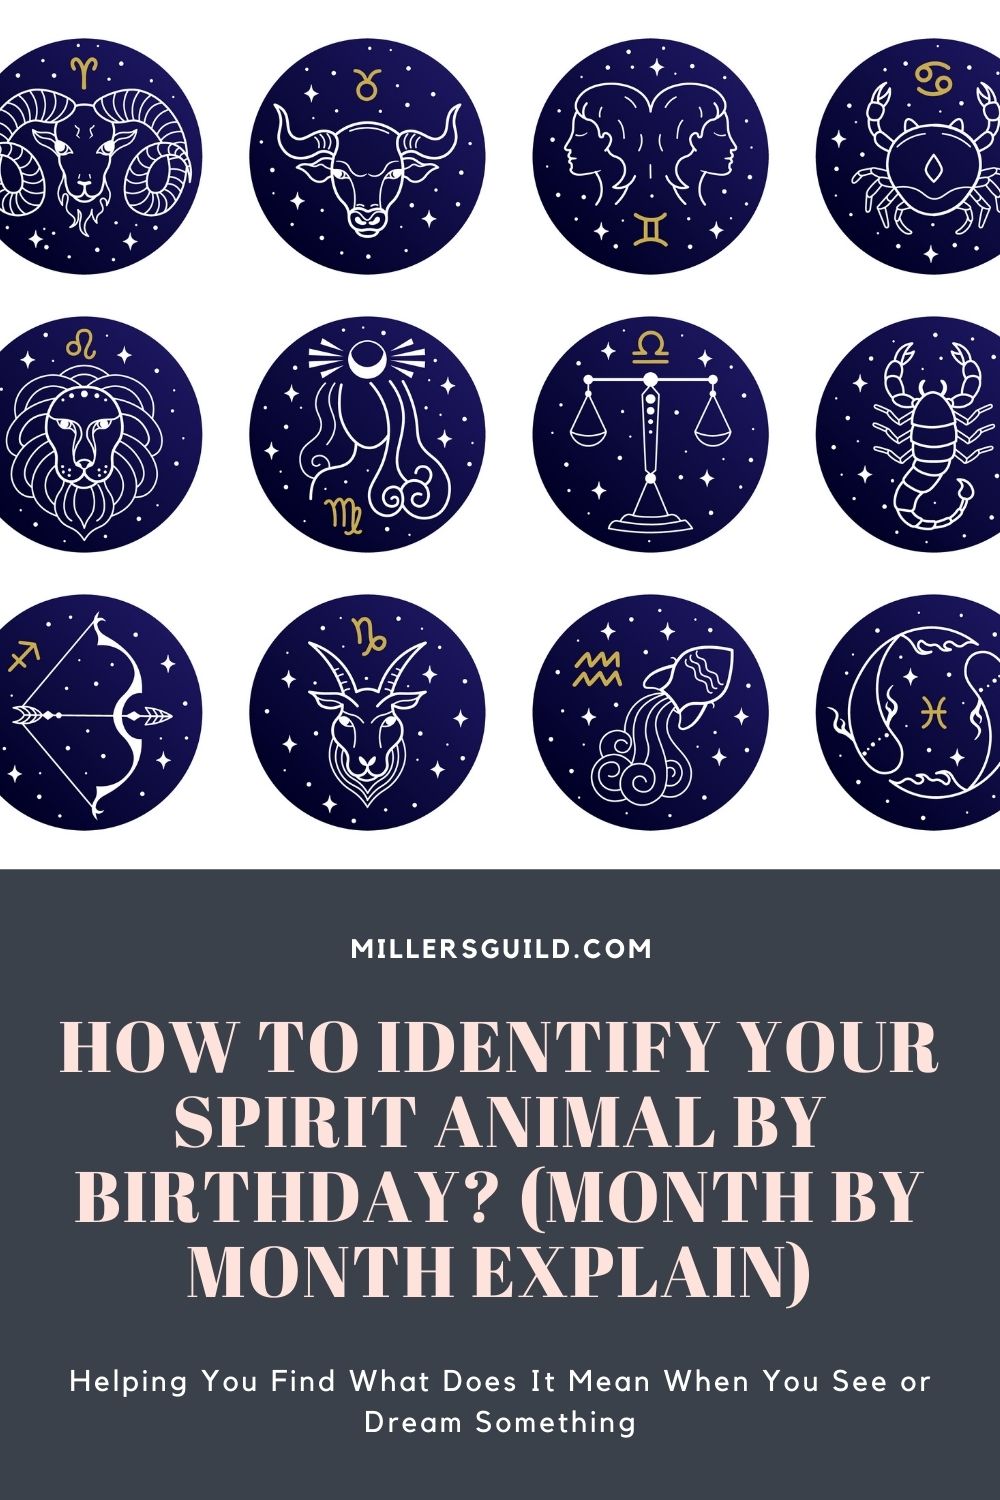 How to Identify Your Spirit Animal by Birthday (Month by Month Explain) 1